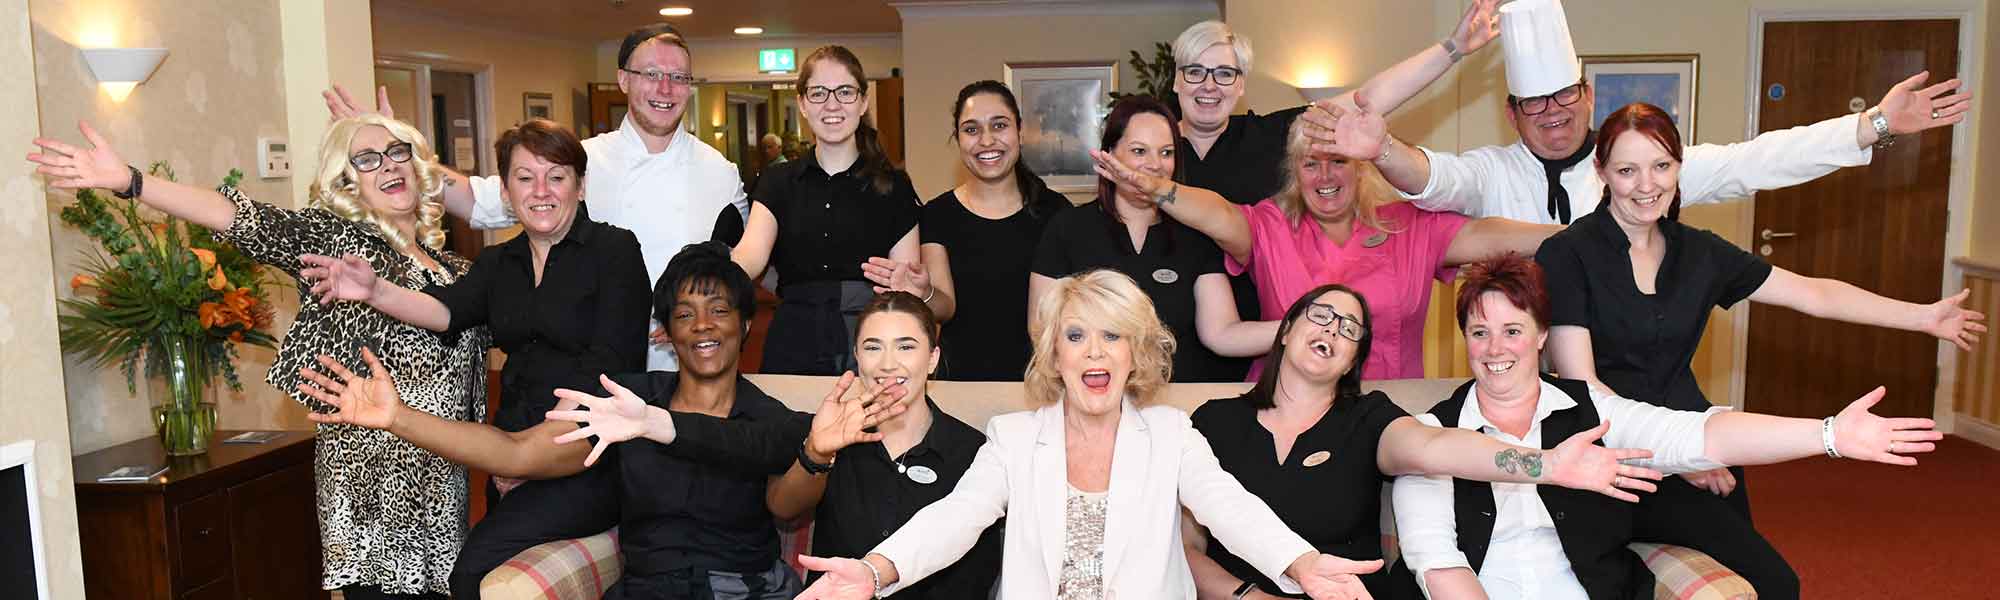 staff at Hawthorns Aldridge celebrate National Care Home Open Day with Avery Ambassador Sherrie Hewson